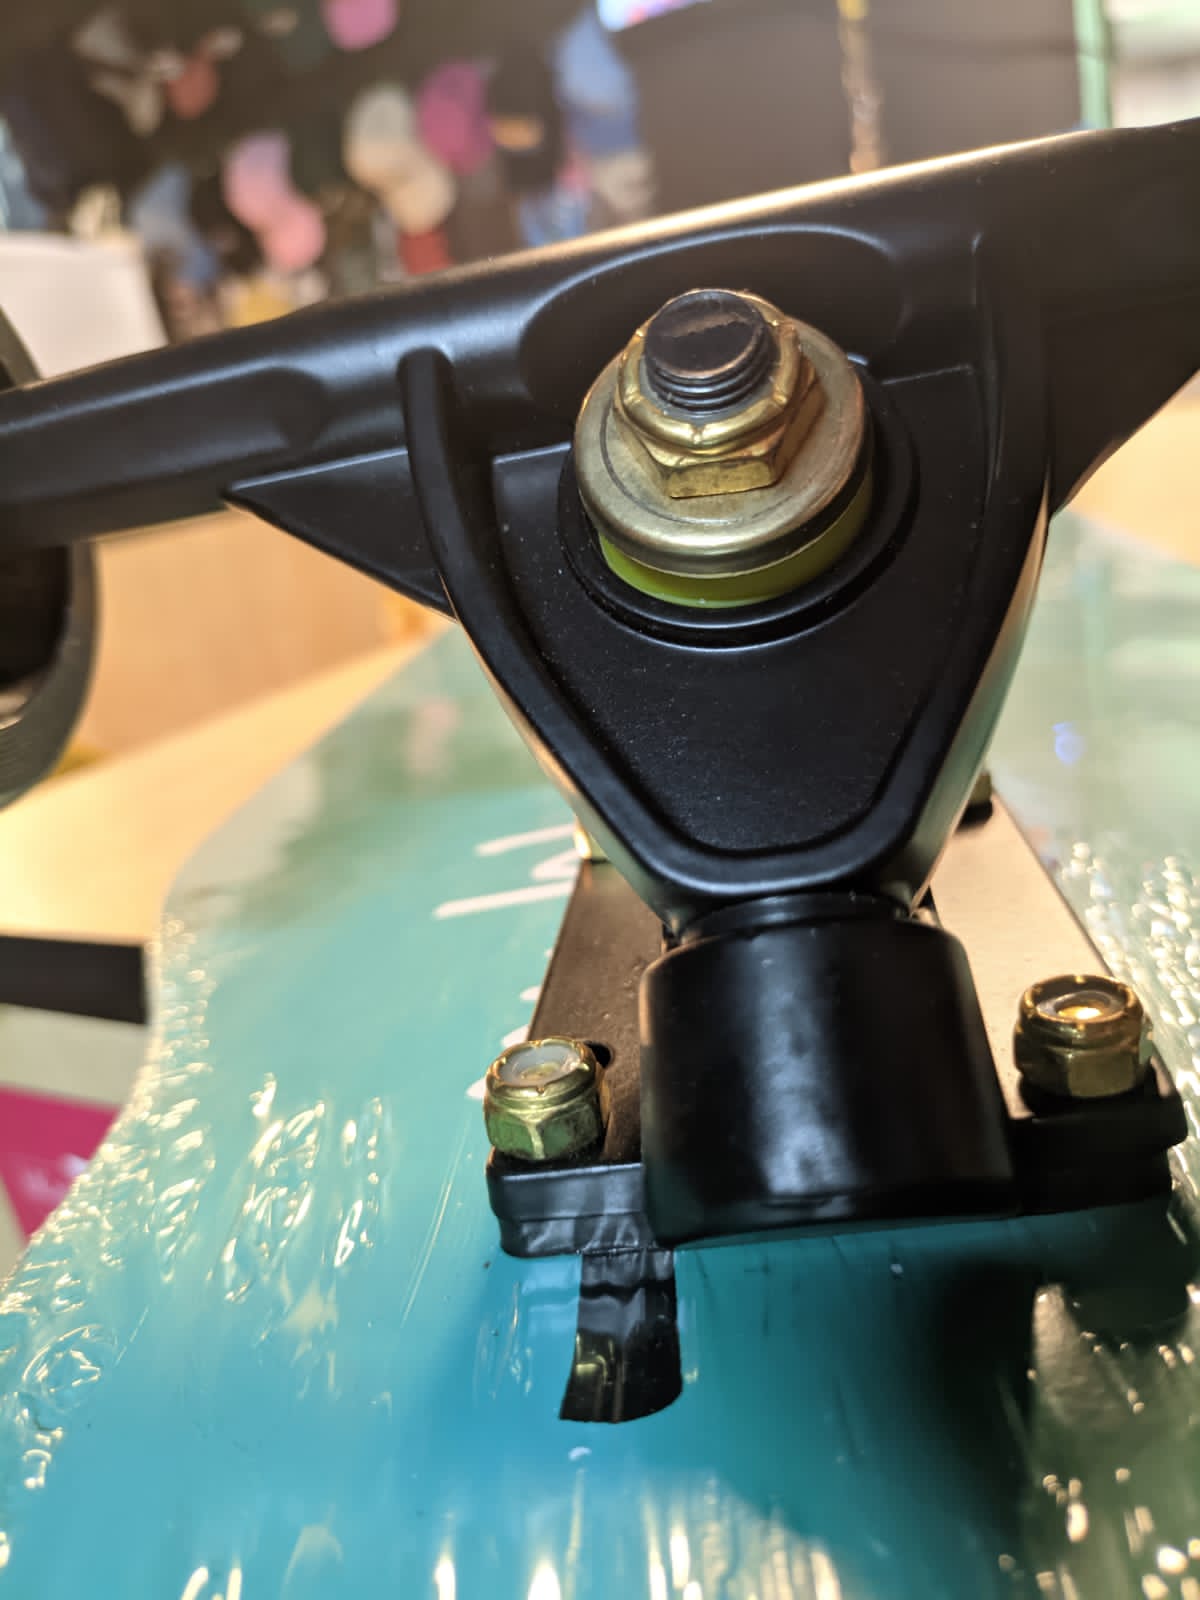 What are some key features to look for in a longboard for freeride riding?